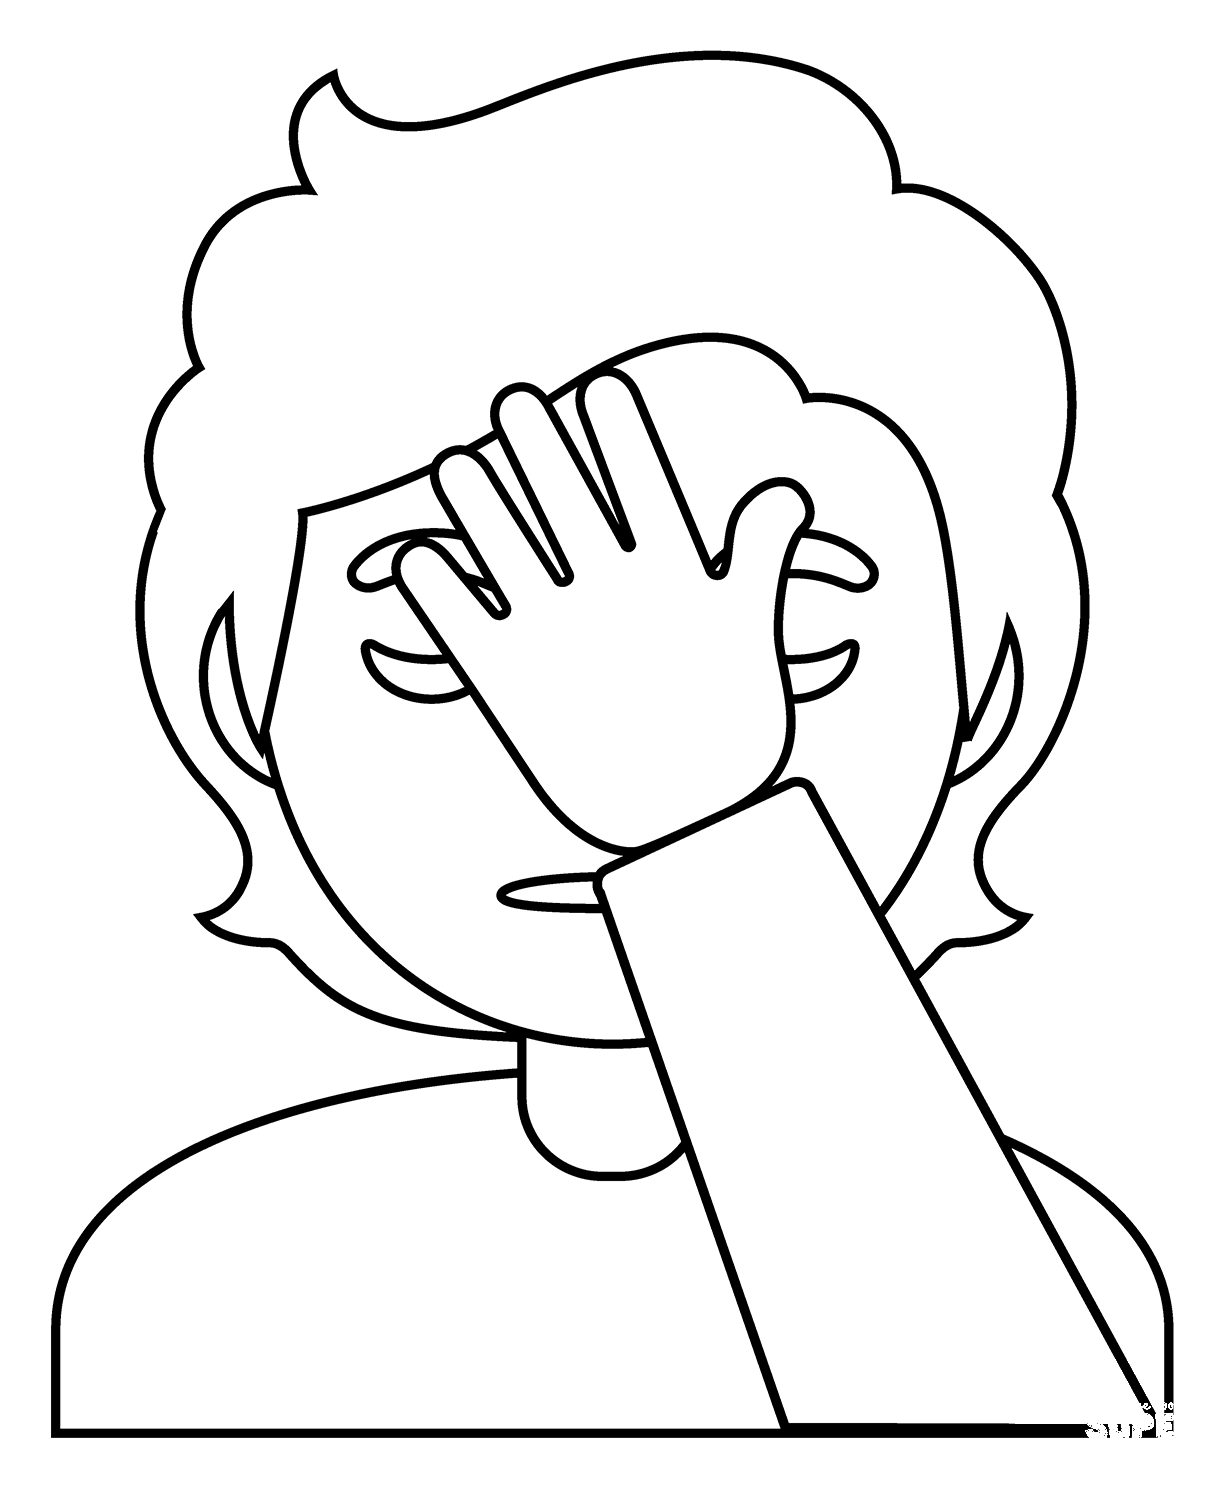 Person Facepalming Emoji coloring page - ColouringPages